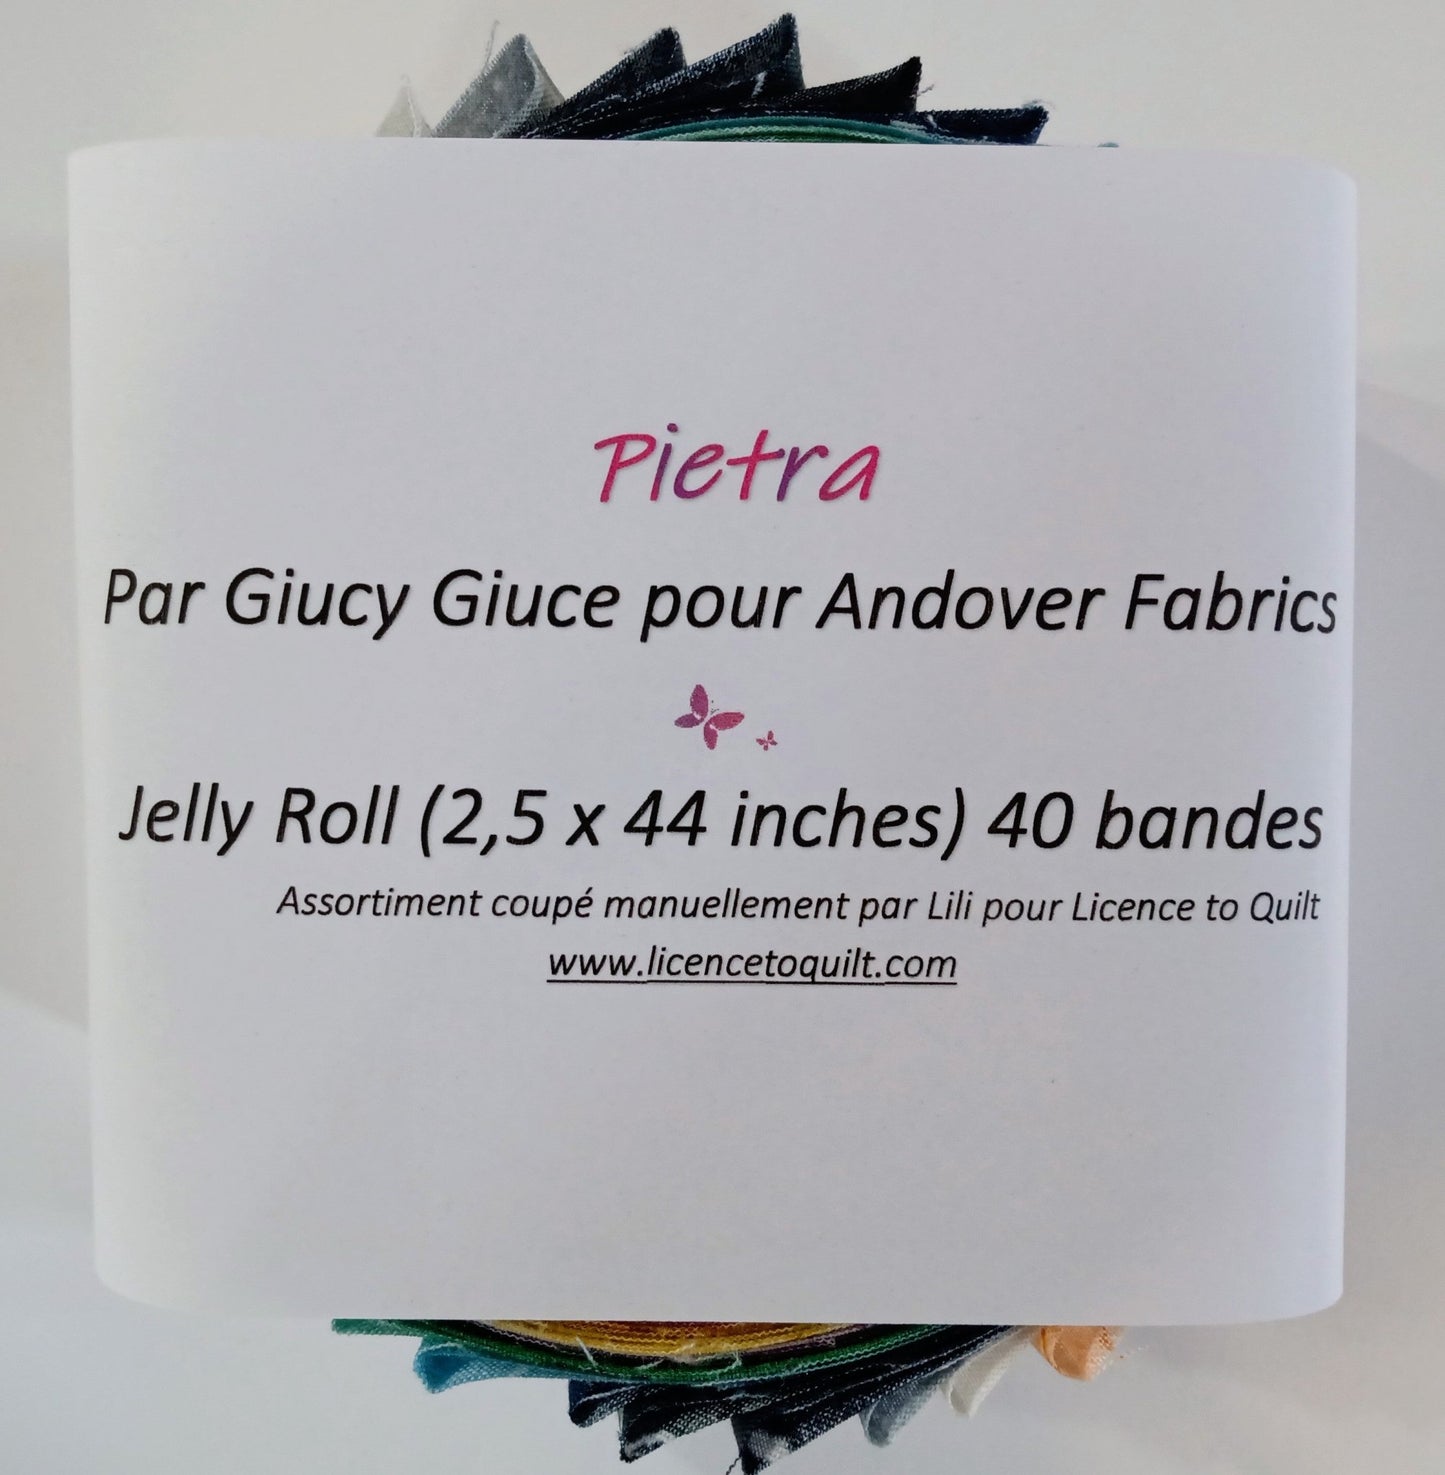 Pietra - Jelly Roll (40 bandes) - Licence To Quilt